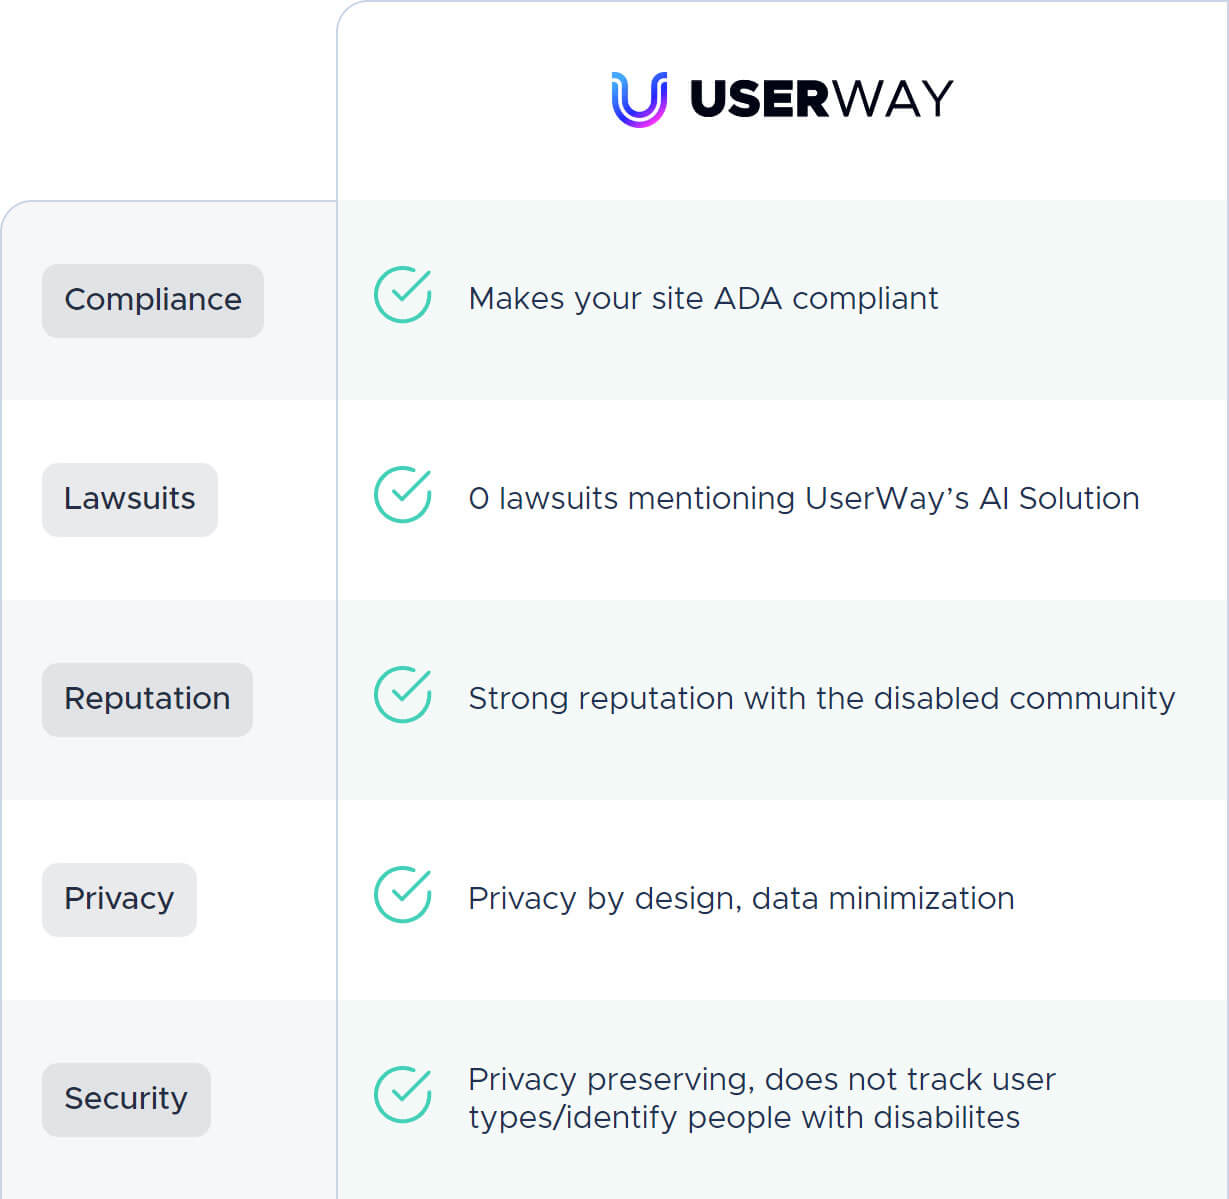 UserWay list of claims. Compliance: Makes your site ADA compliant. Lawsuits: 0 lawsuits mentioning UserWay’s AI Solution. Reputation: Strong reputation with the disabled community. Privacy: Privacy by design, data minimization. Security: Privacy preserving, does not track user types/identify people with disabilites [sic].